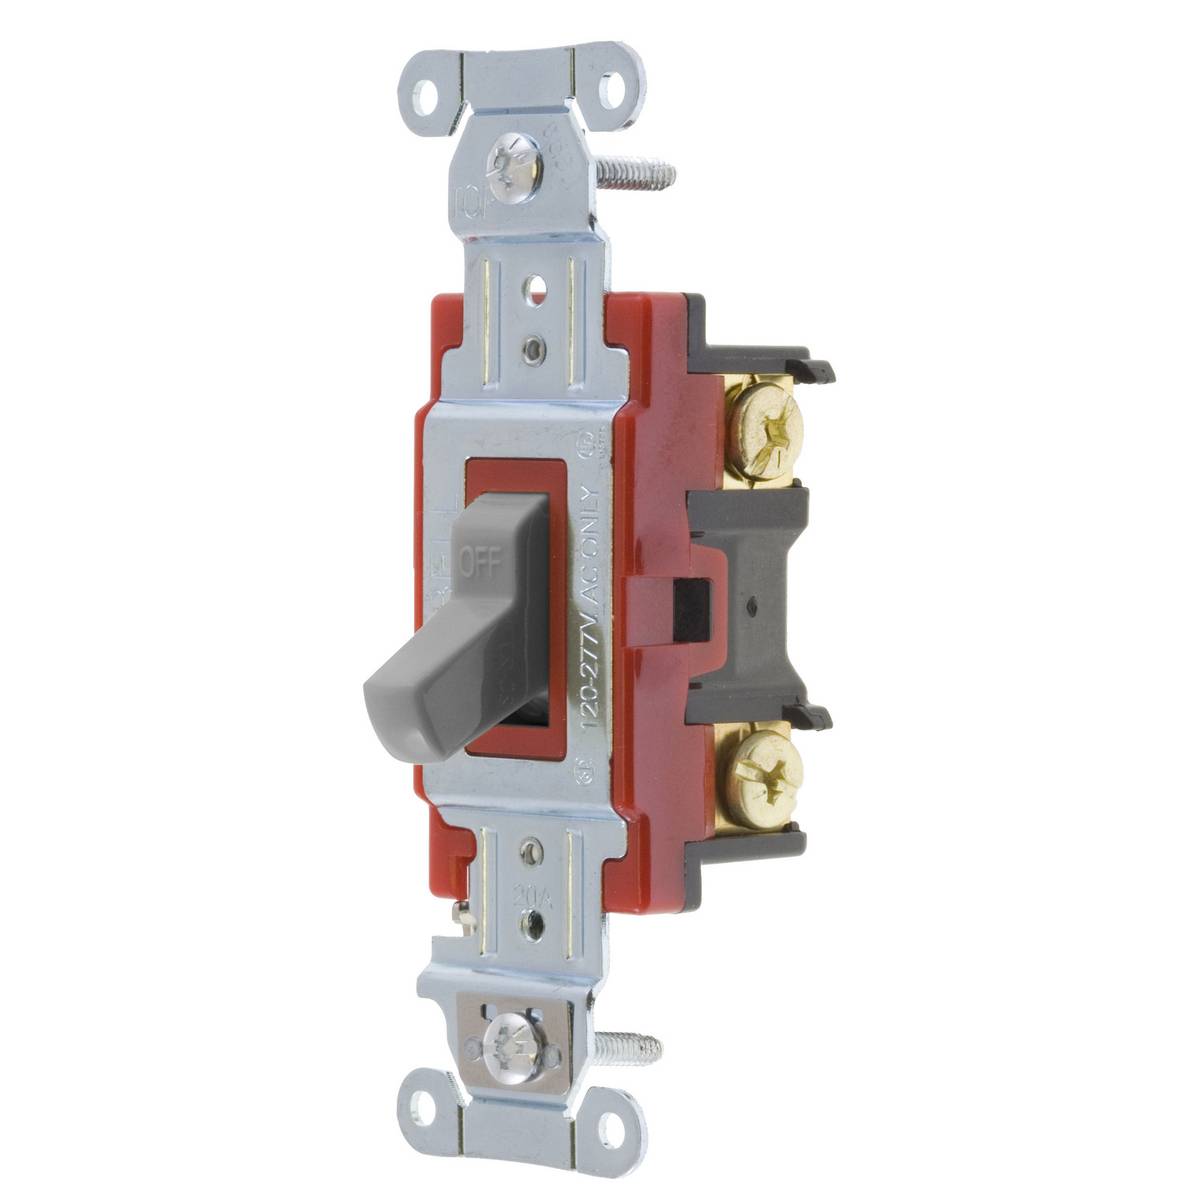 Wiring Device-Kellems Hubbell-PRO™ 1222GY 2-Position Heavy Duty Standard Toggle Switch, 120 to 277 VAC, 20 A, 5540 W Power Rating, 2-Position Contact